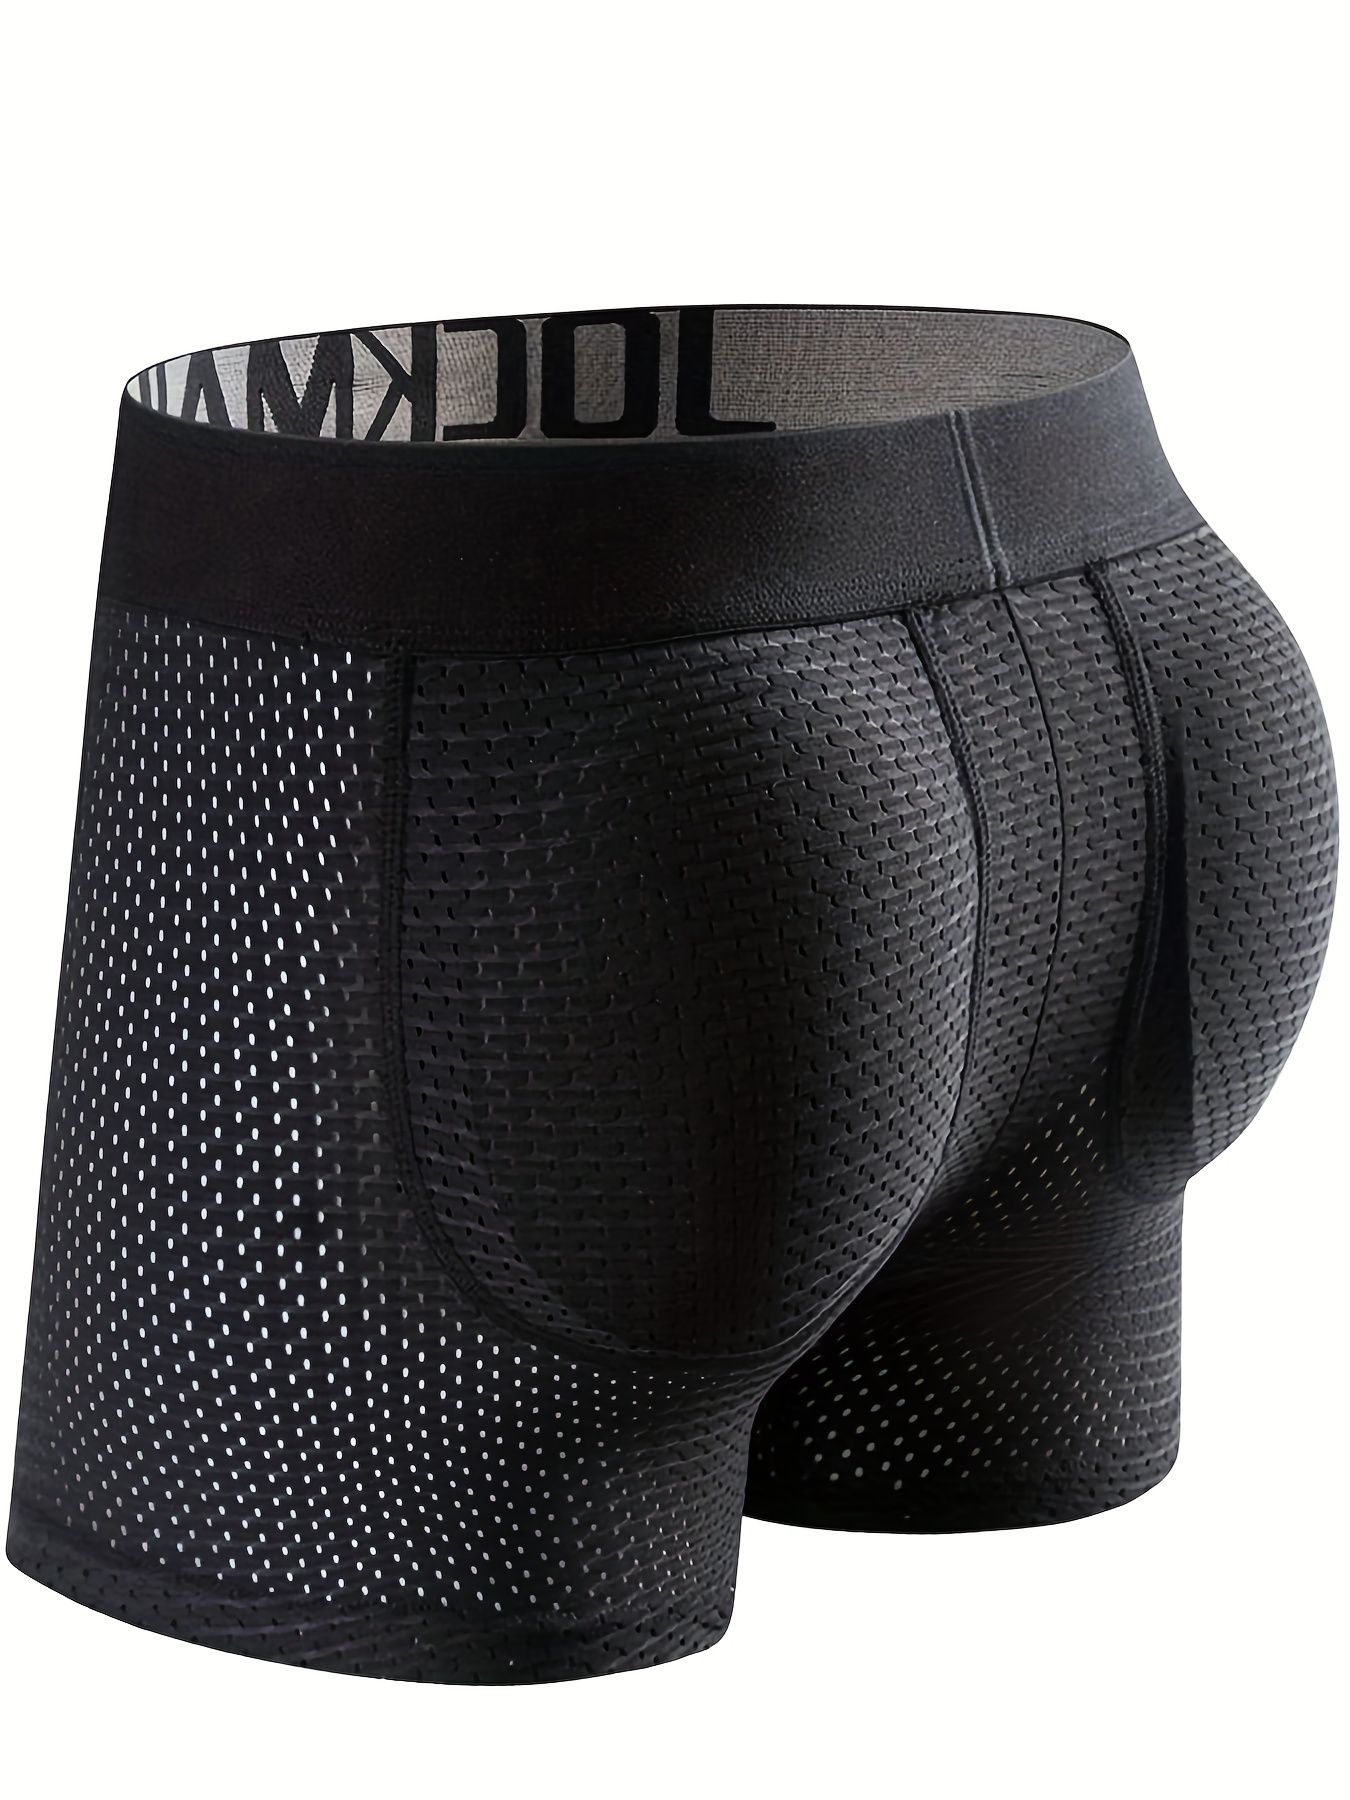 Soft mens crotch padded underwear For Comfort 